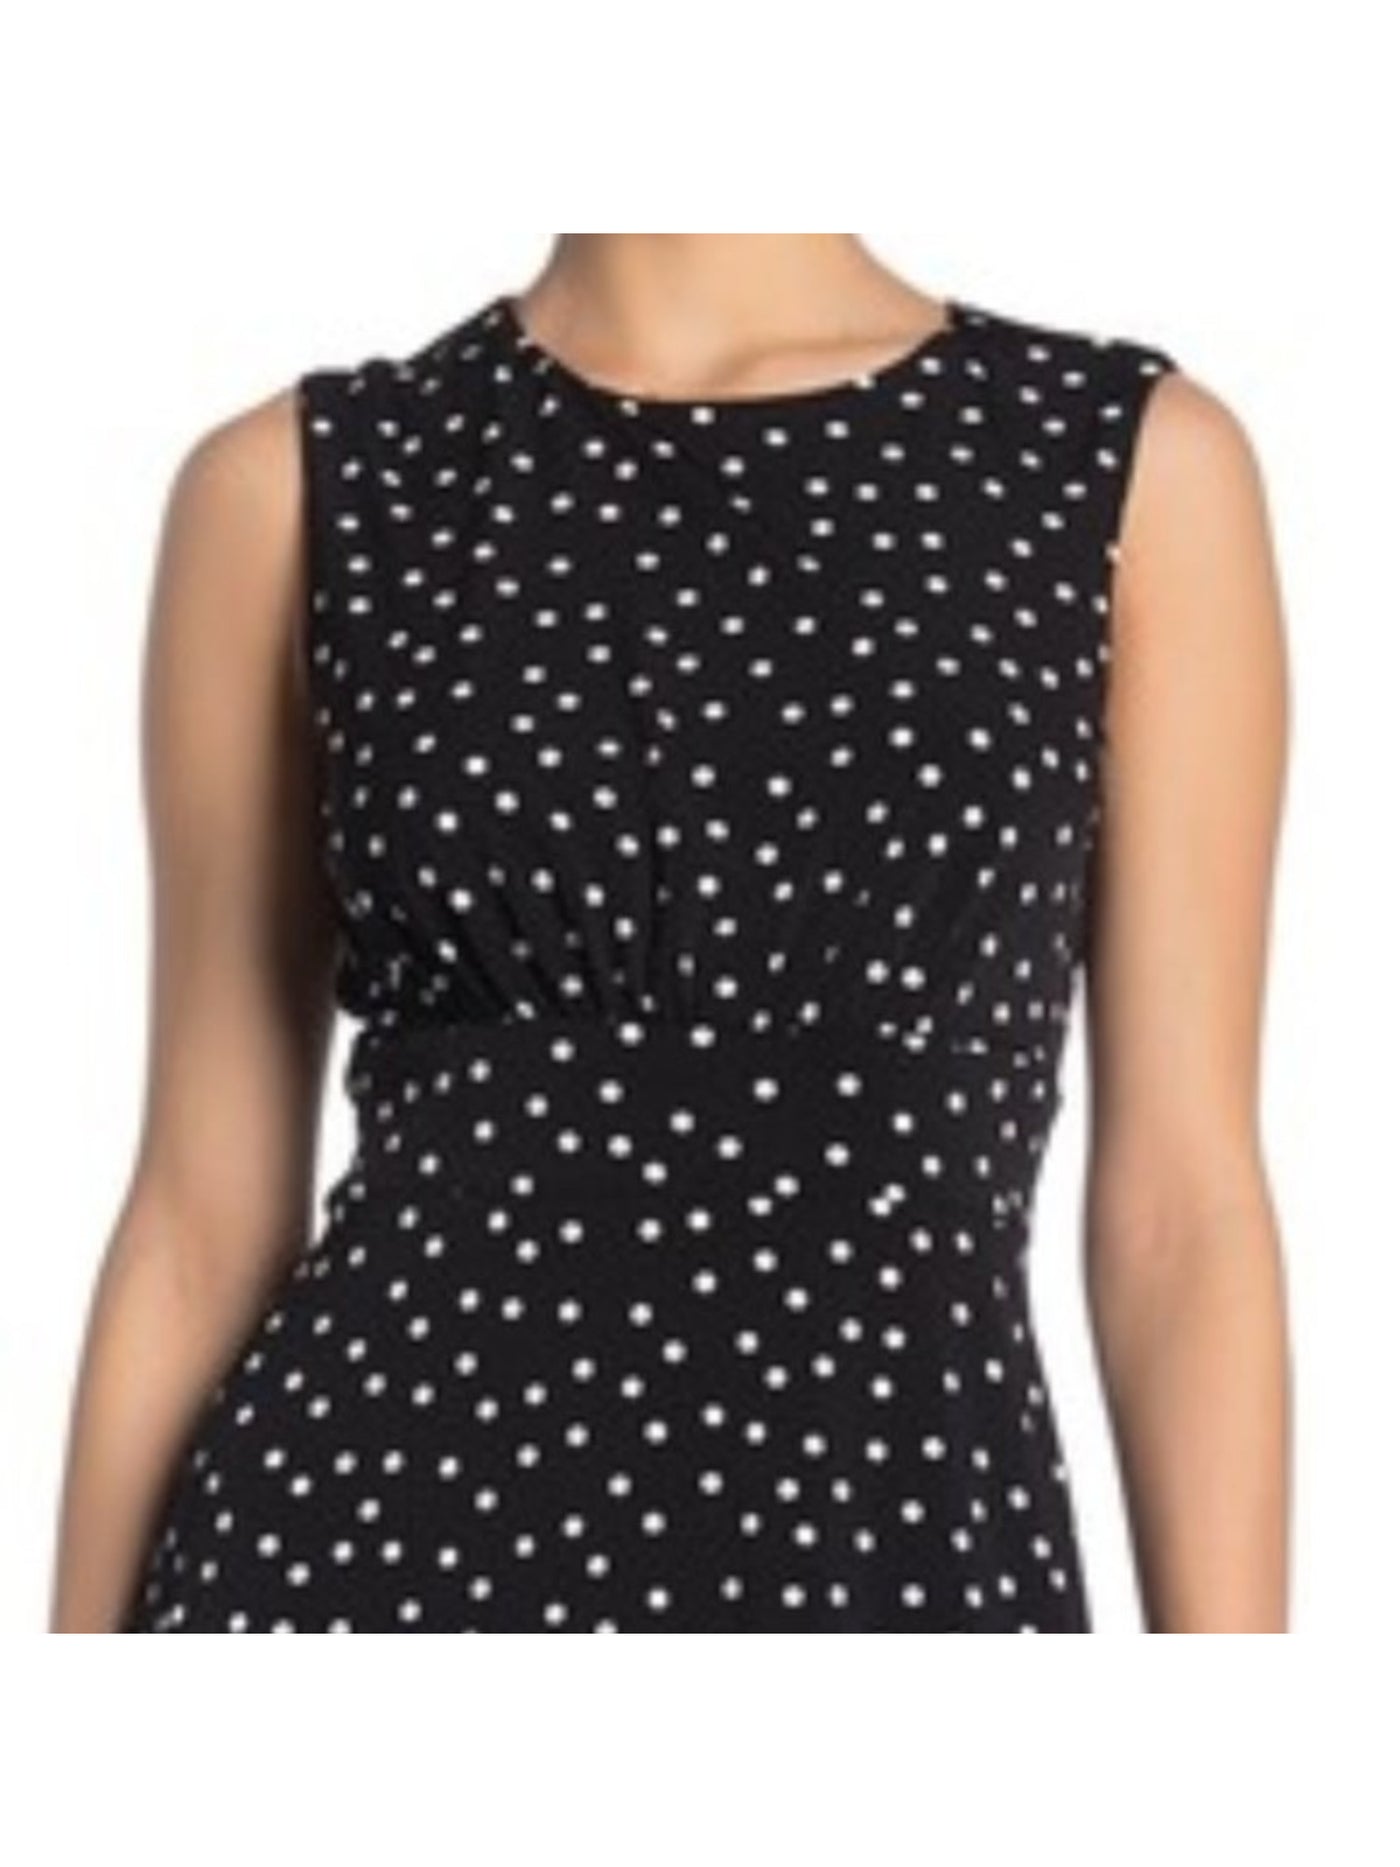 LONDON TIMES PETITES Womens Black Jersey Gathered Zippered Partially Lined Polka Dot Sleeveless Crew Neck Below The Knee Fit + Flare Dress Petites 12P